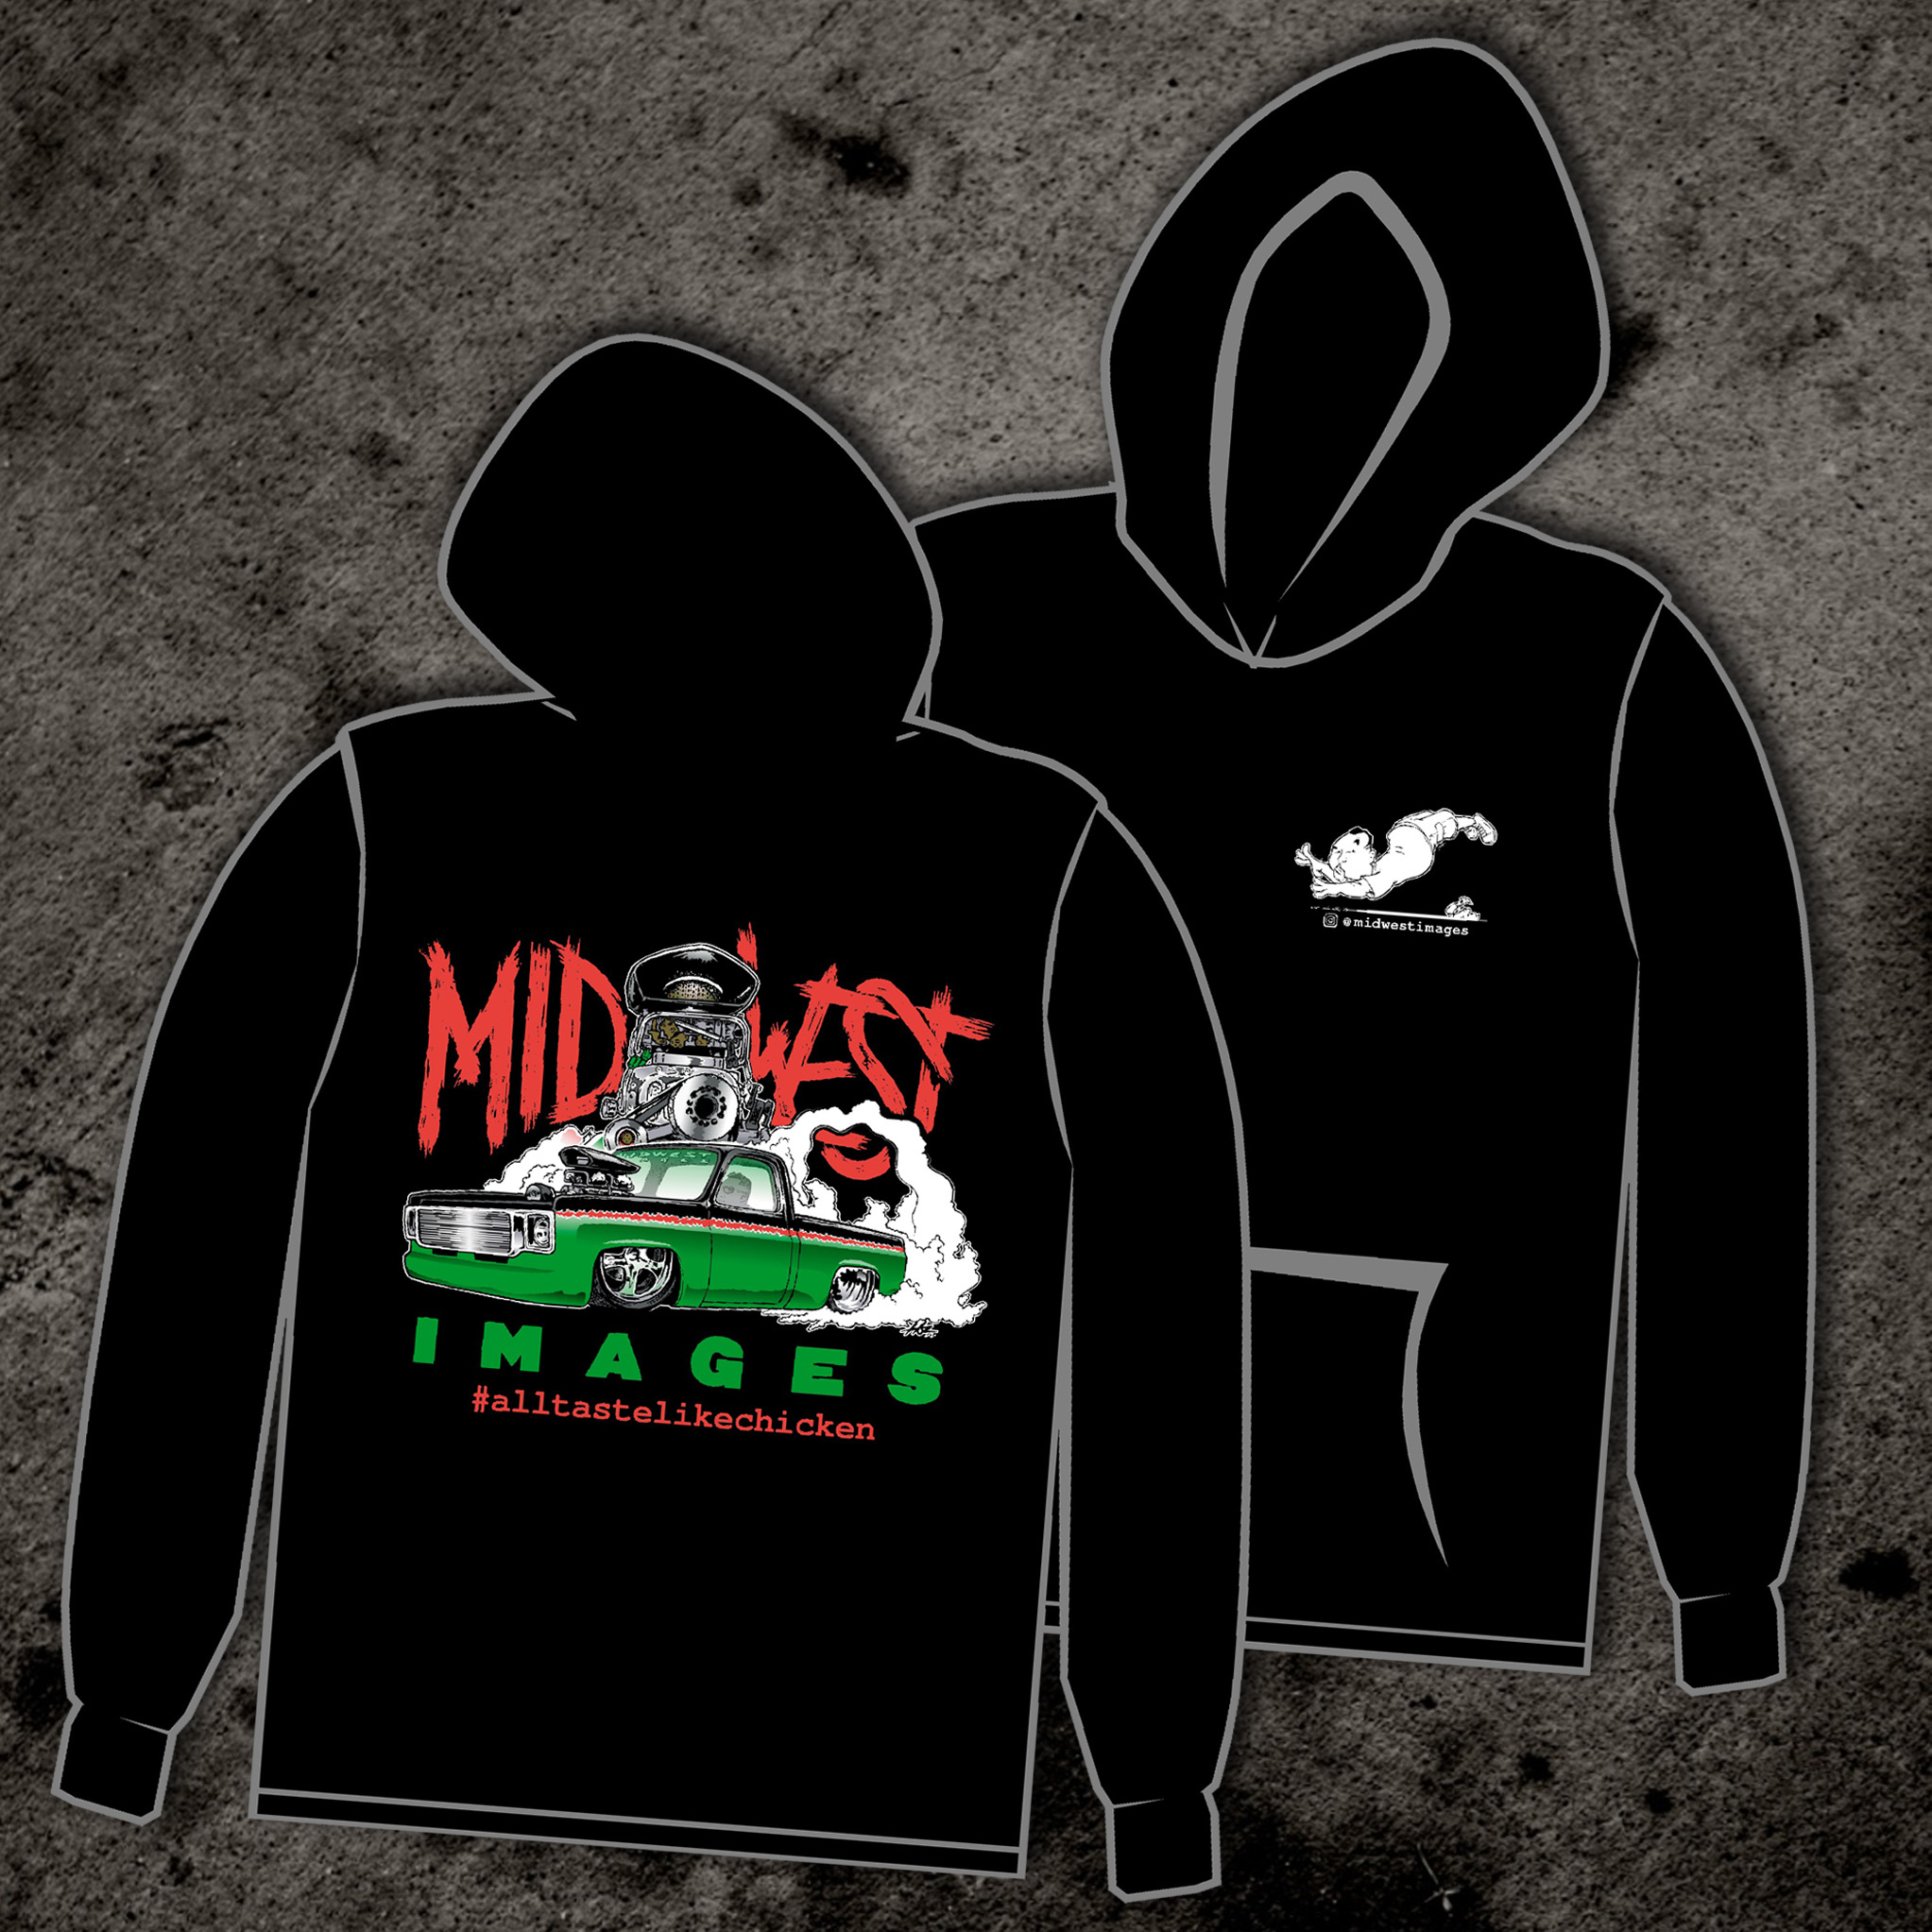 C10 Midwest Images Hoodies | Midwest Images Merch